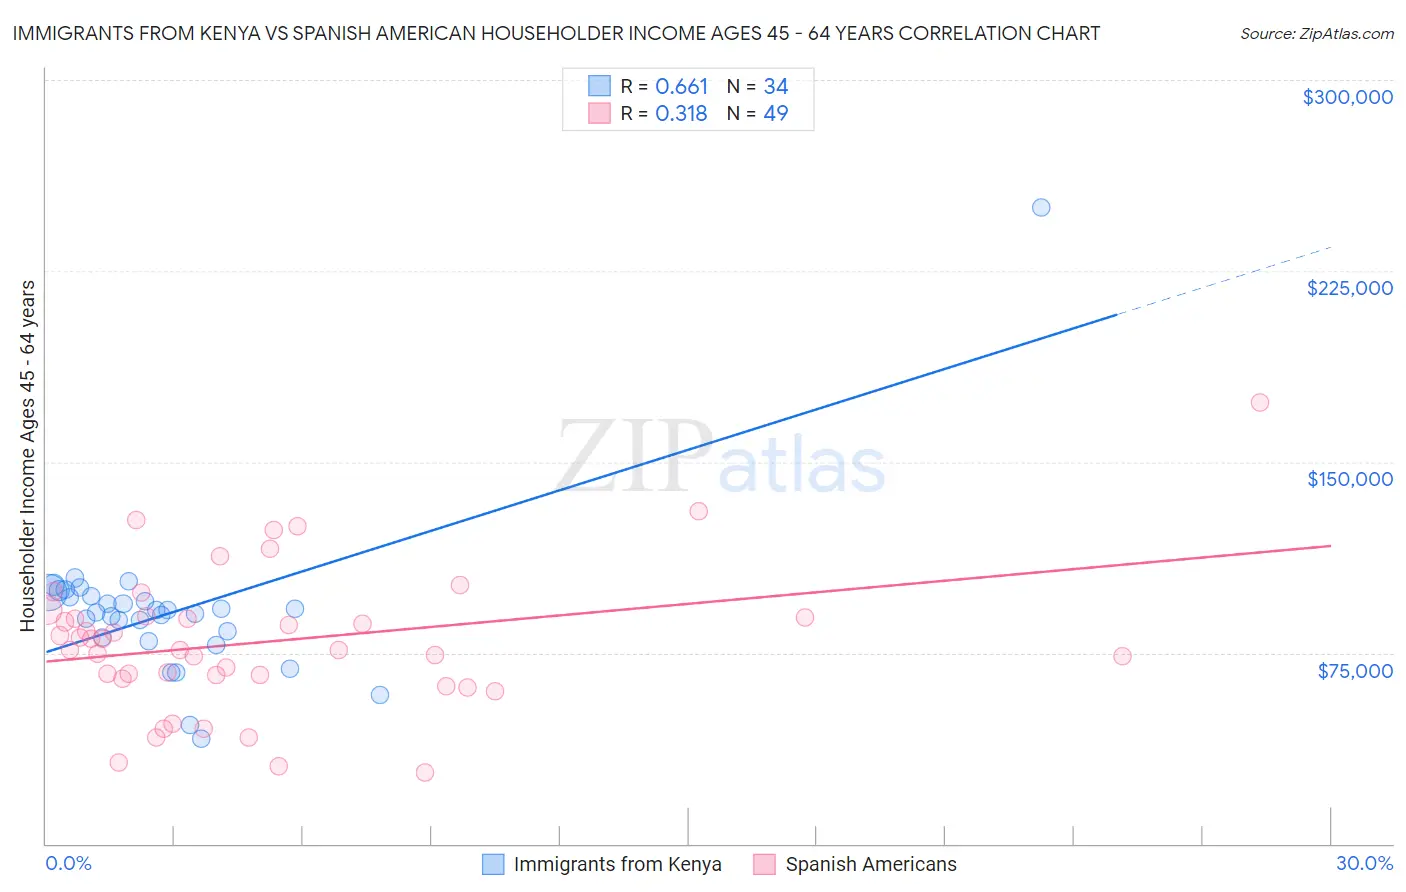 Immigrants from Kenya vs Spanish American Householder Income Ages 45 - 64 years